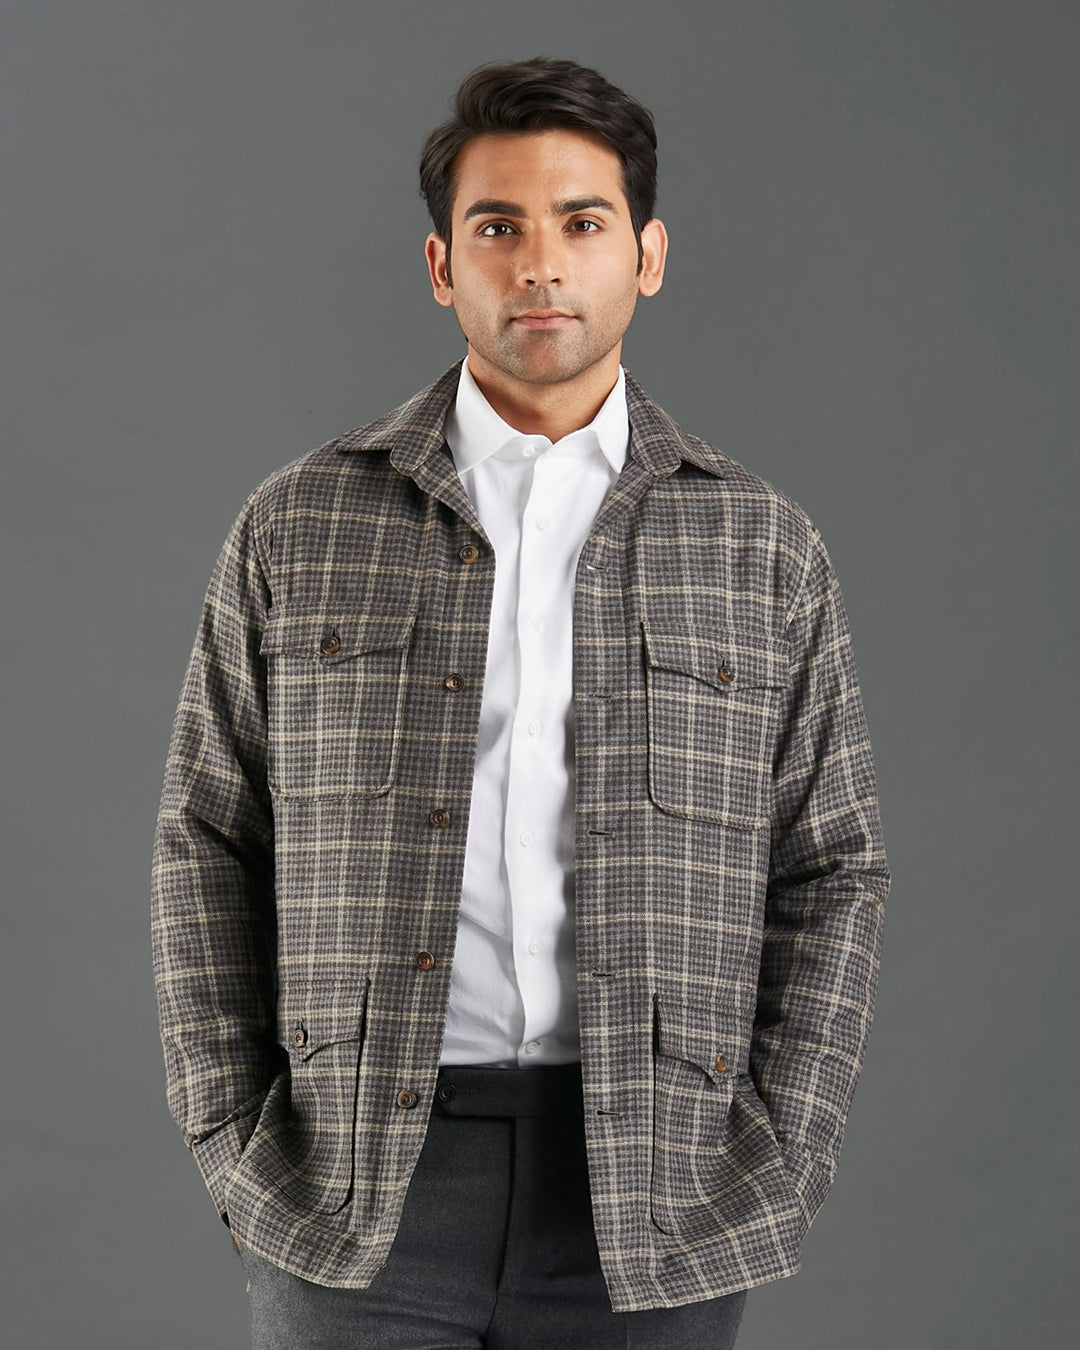 Front of model wearing the shirt jacket for men by Luxire in brown and grey overchecks hands in pockets